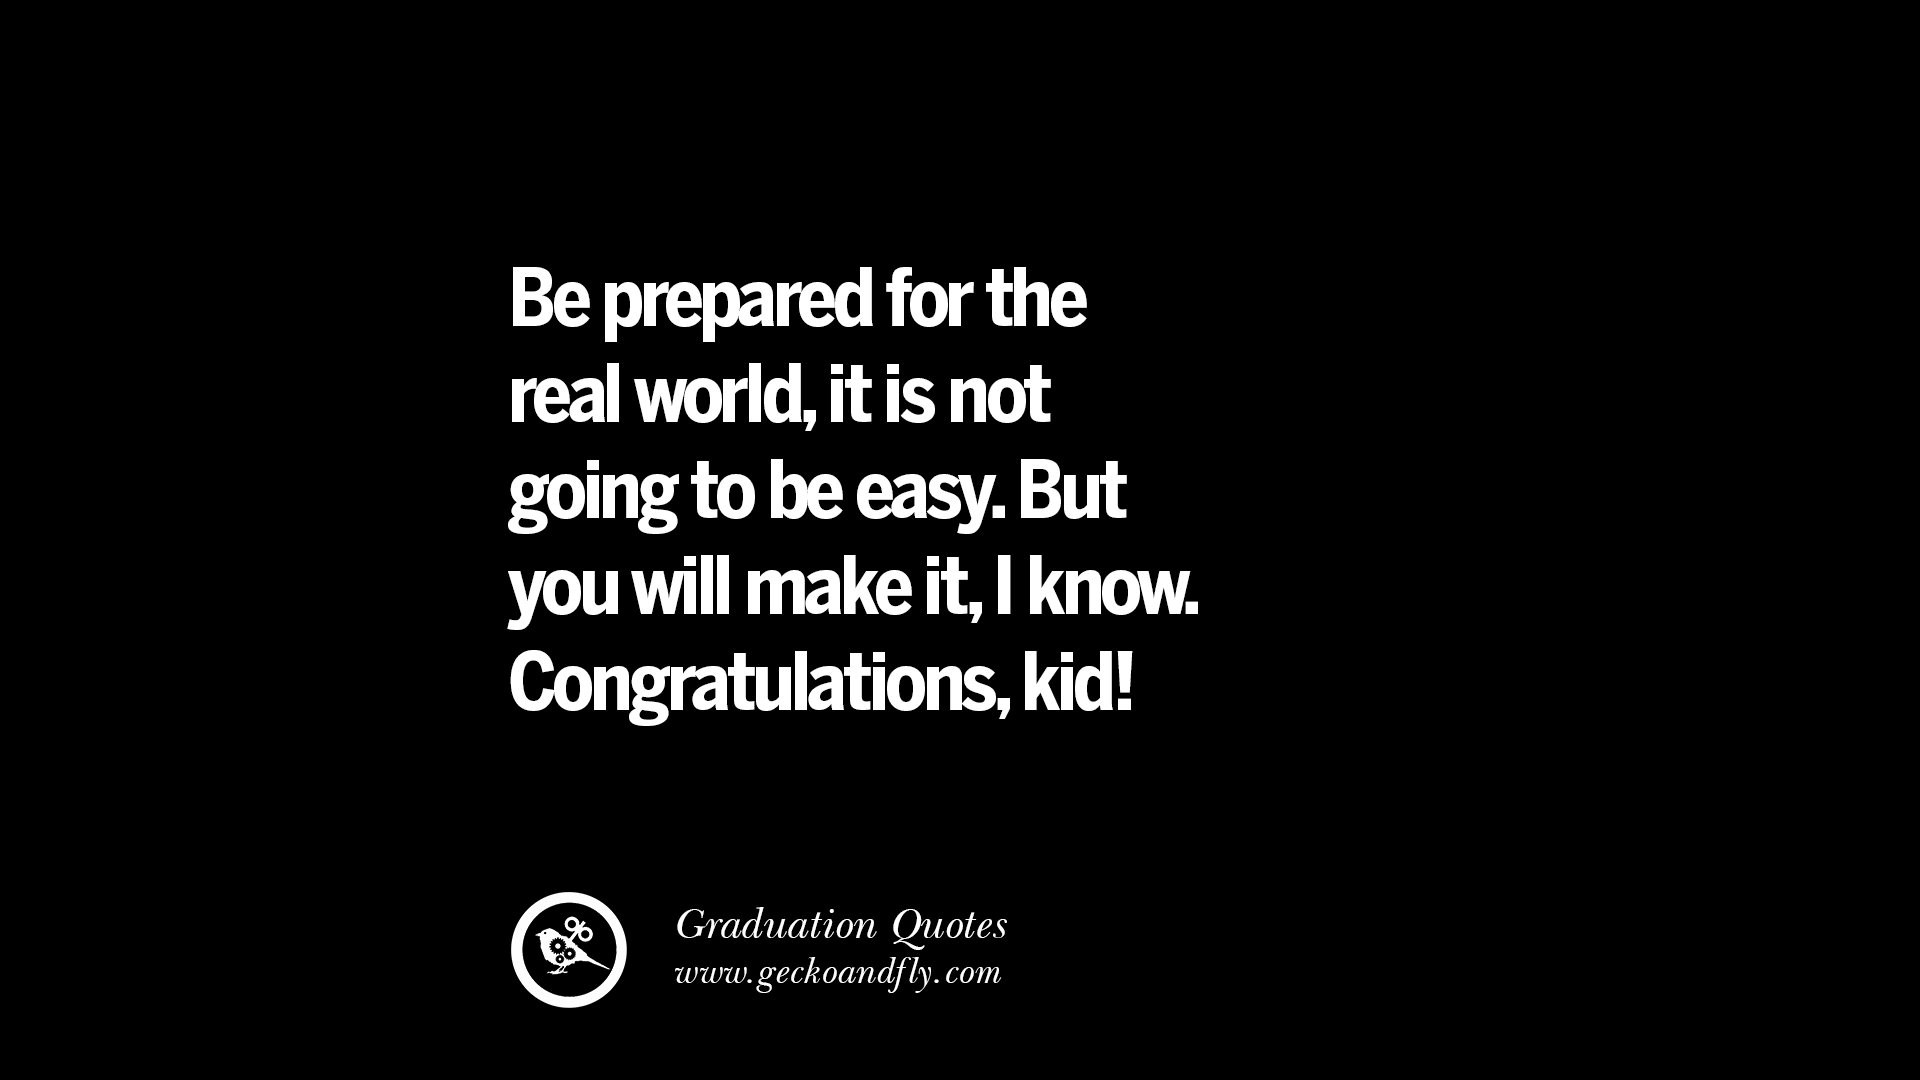 Graduation 2016 Quotes
 30 Inspirational Quotes on Graduation For High School And